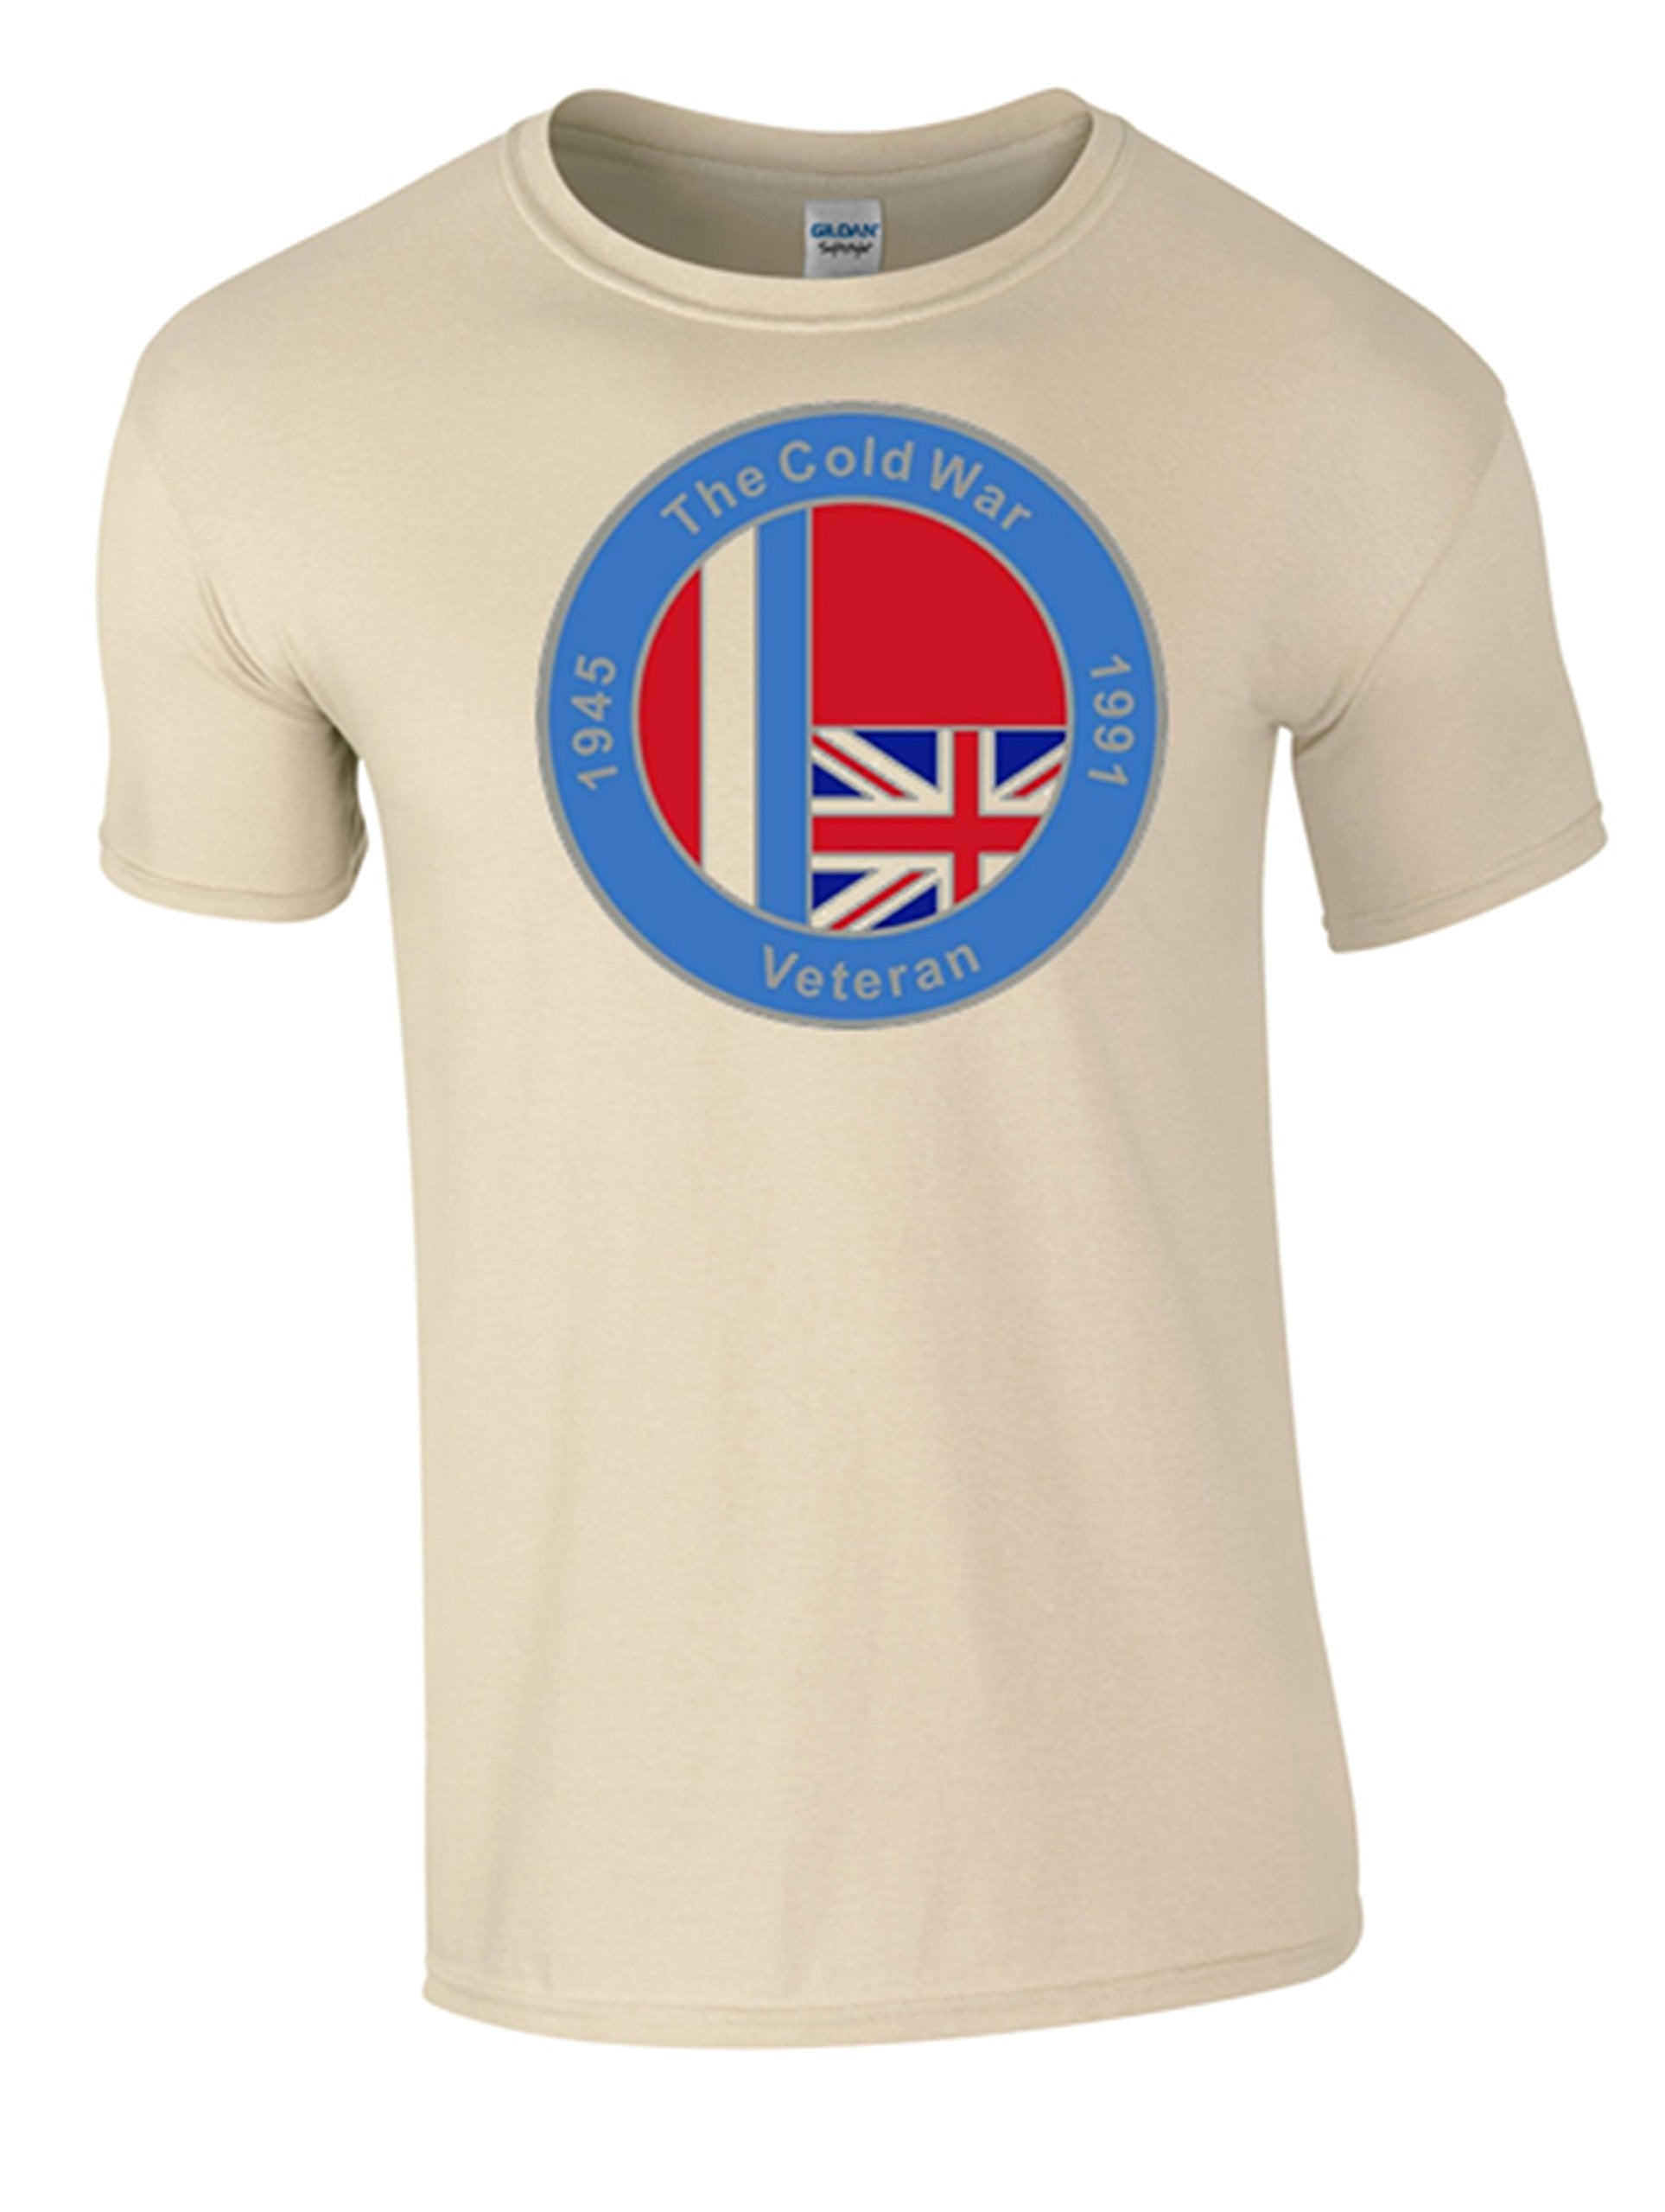 Bear Essentials Clothing. Cold War Op Banner T/Shirt (XXL, Sand) - Army 1157 kit Army 1157 Kit